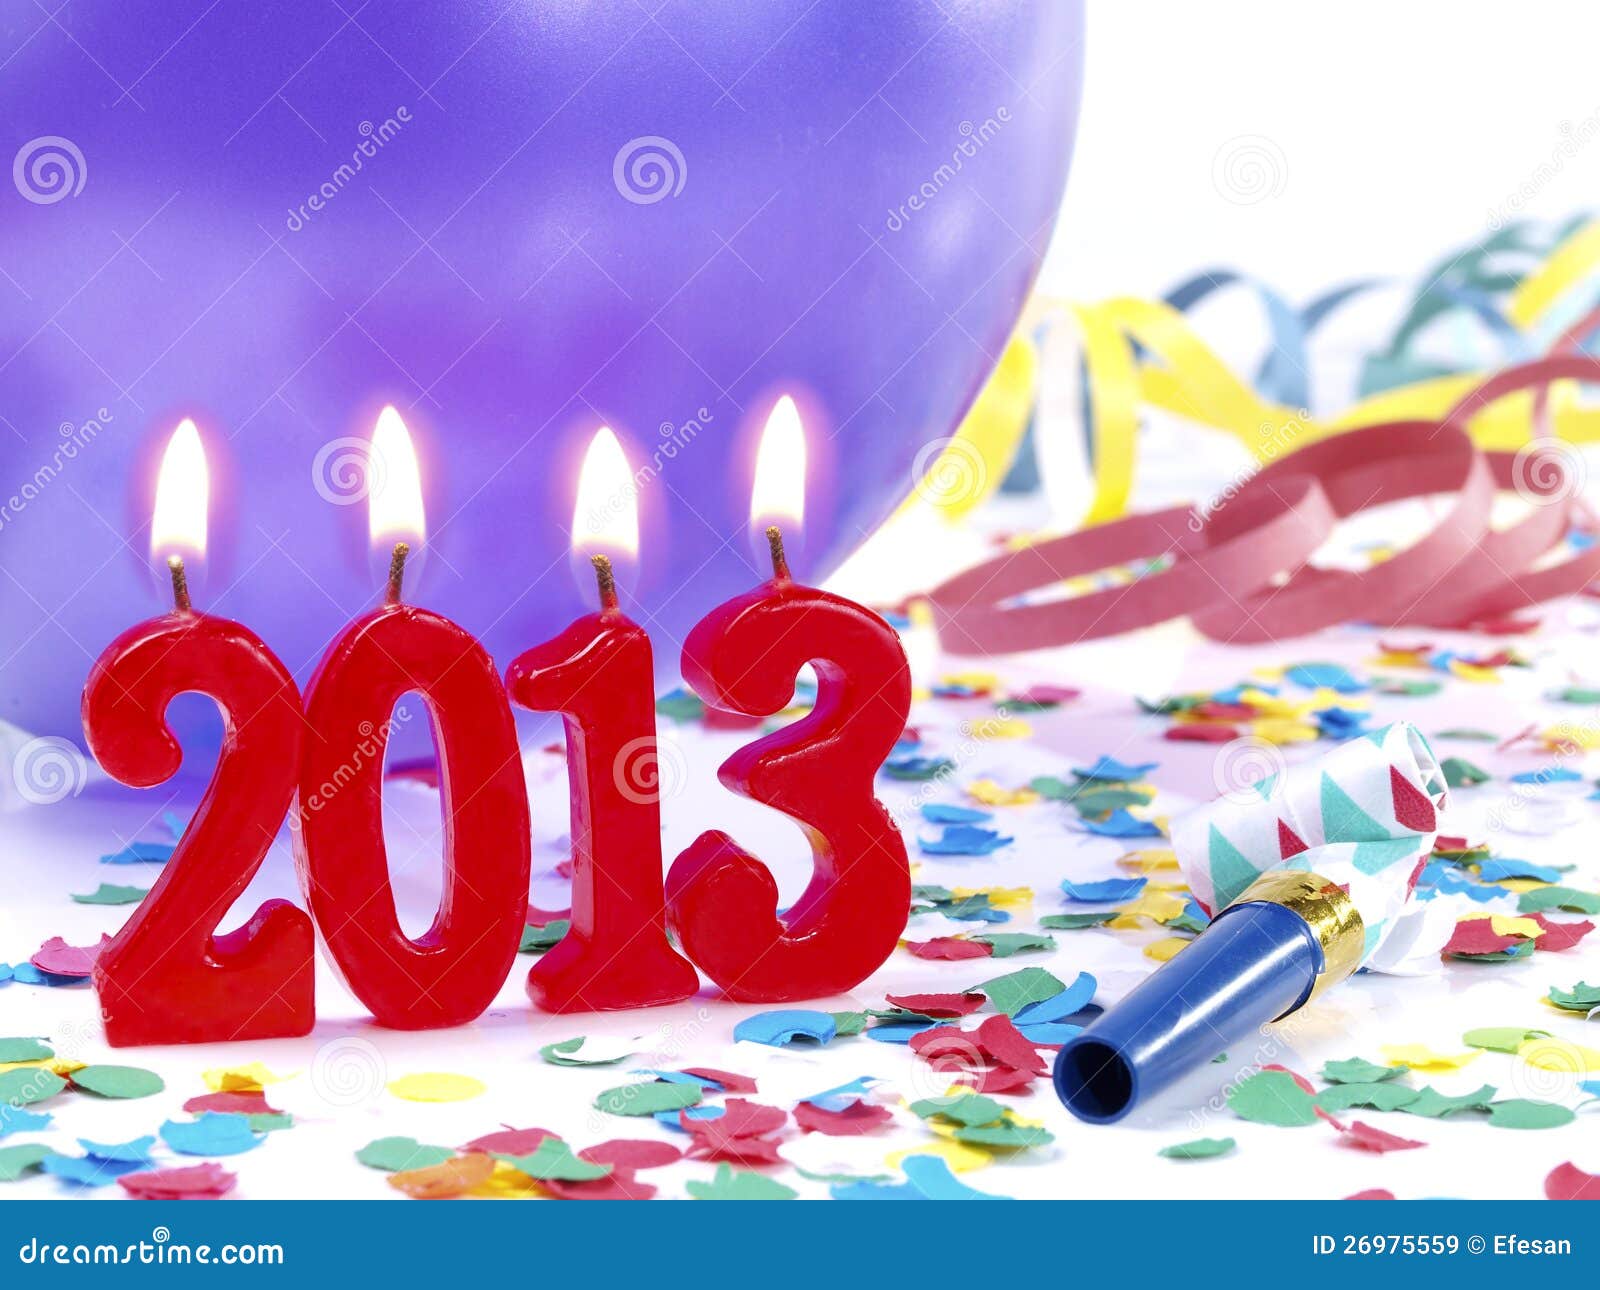 free clipart new years eve 2013 - photo #9